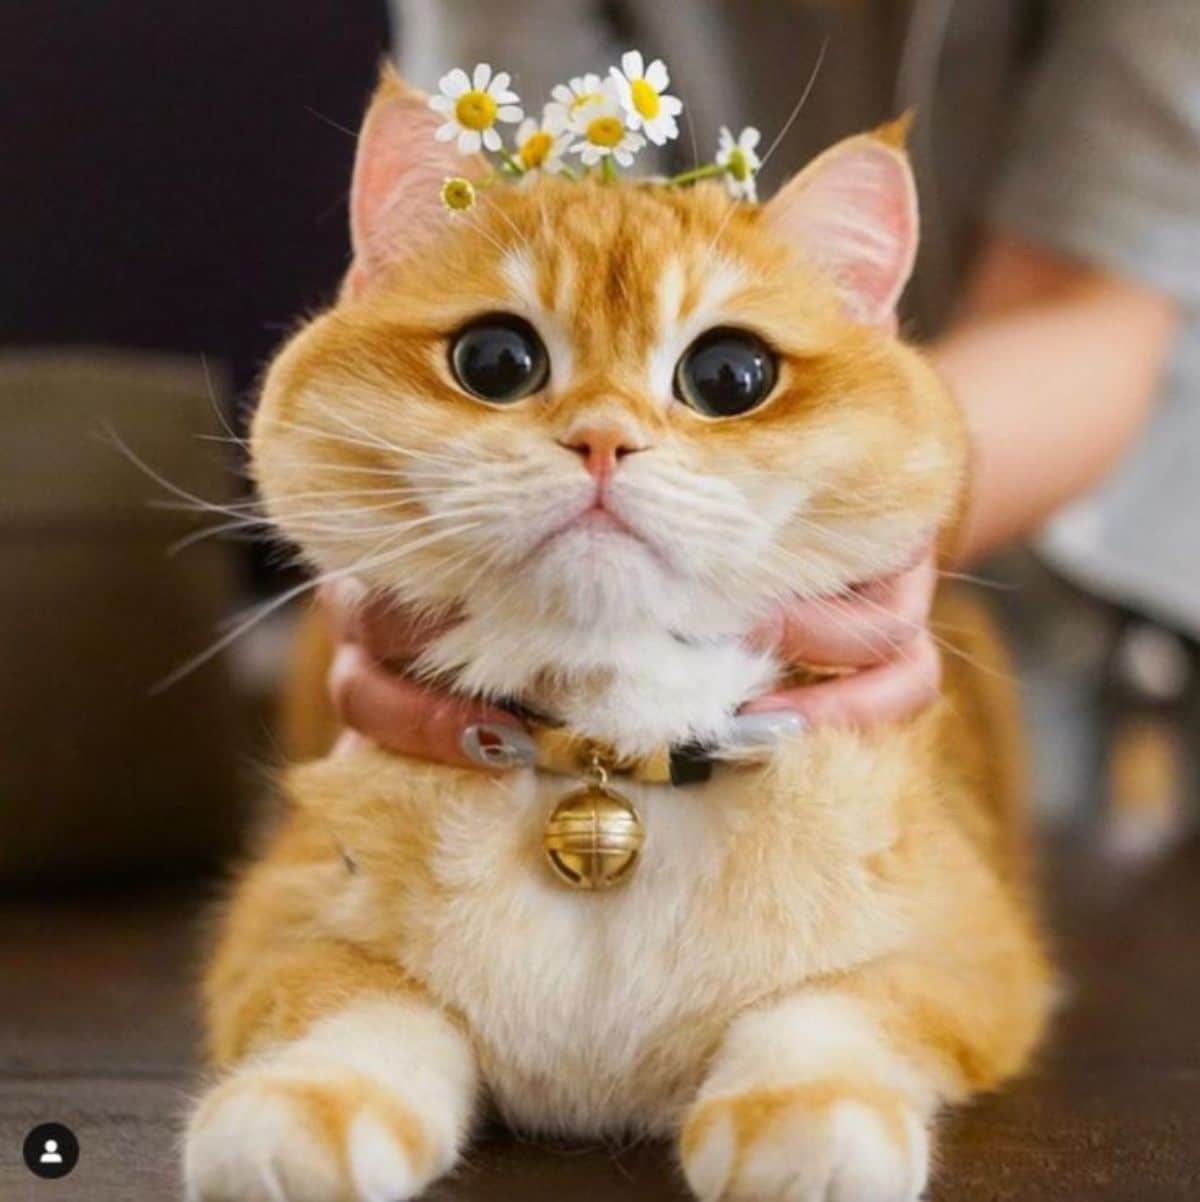 orange cat with large black eyes with some small white flowers on its head